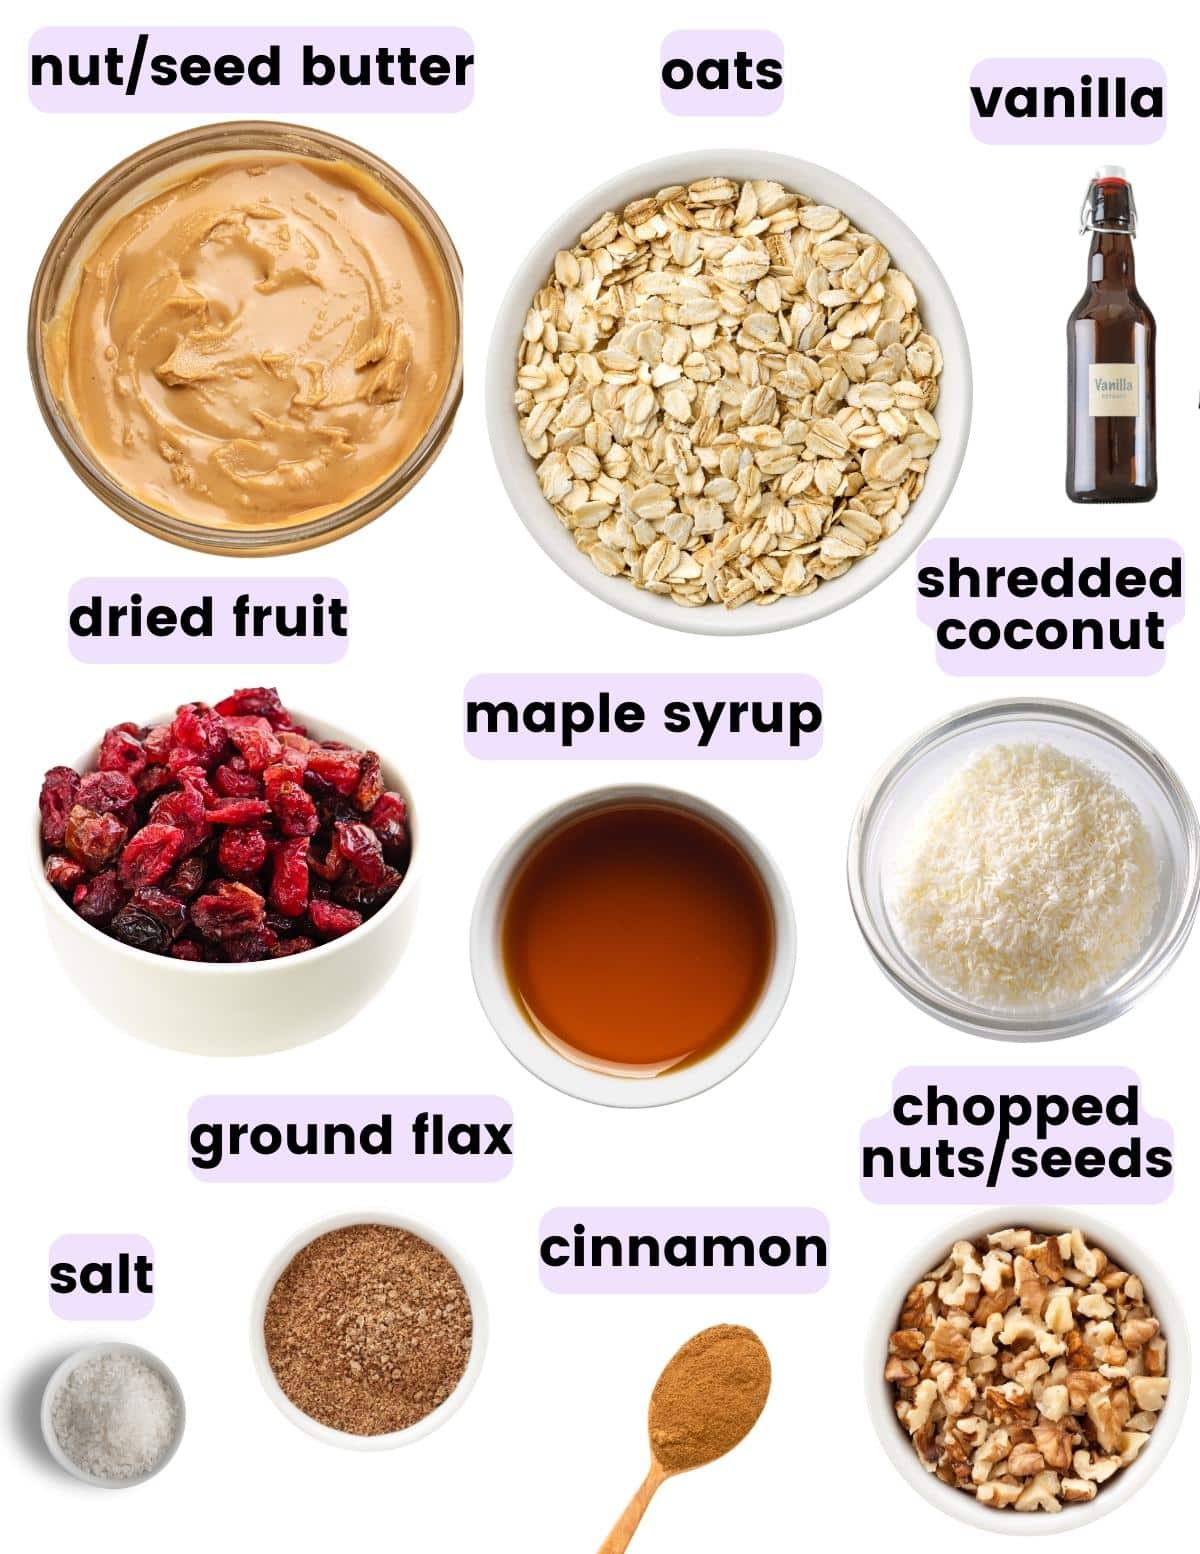 nut butter, oats, vanilla, dried fruit, maple syrup, shredded coconut, maple syrup, salt, ground flax, cinnamon, chopped nuts/seeds